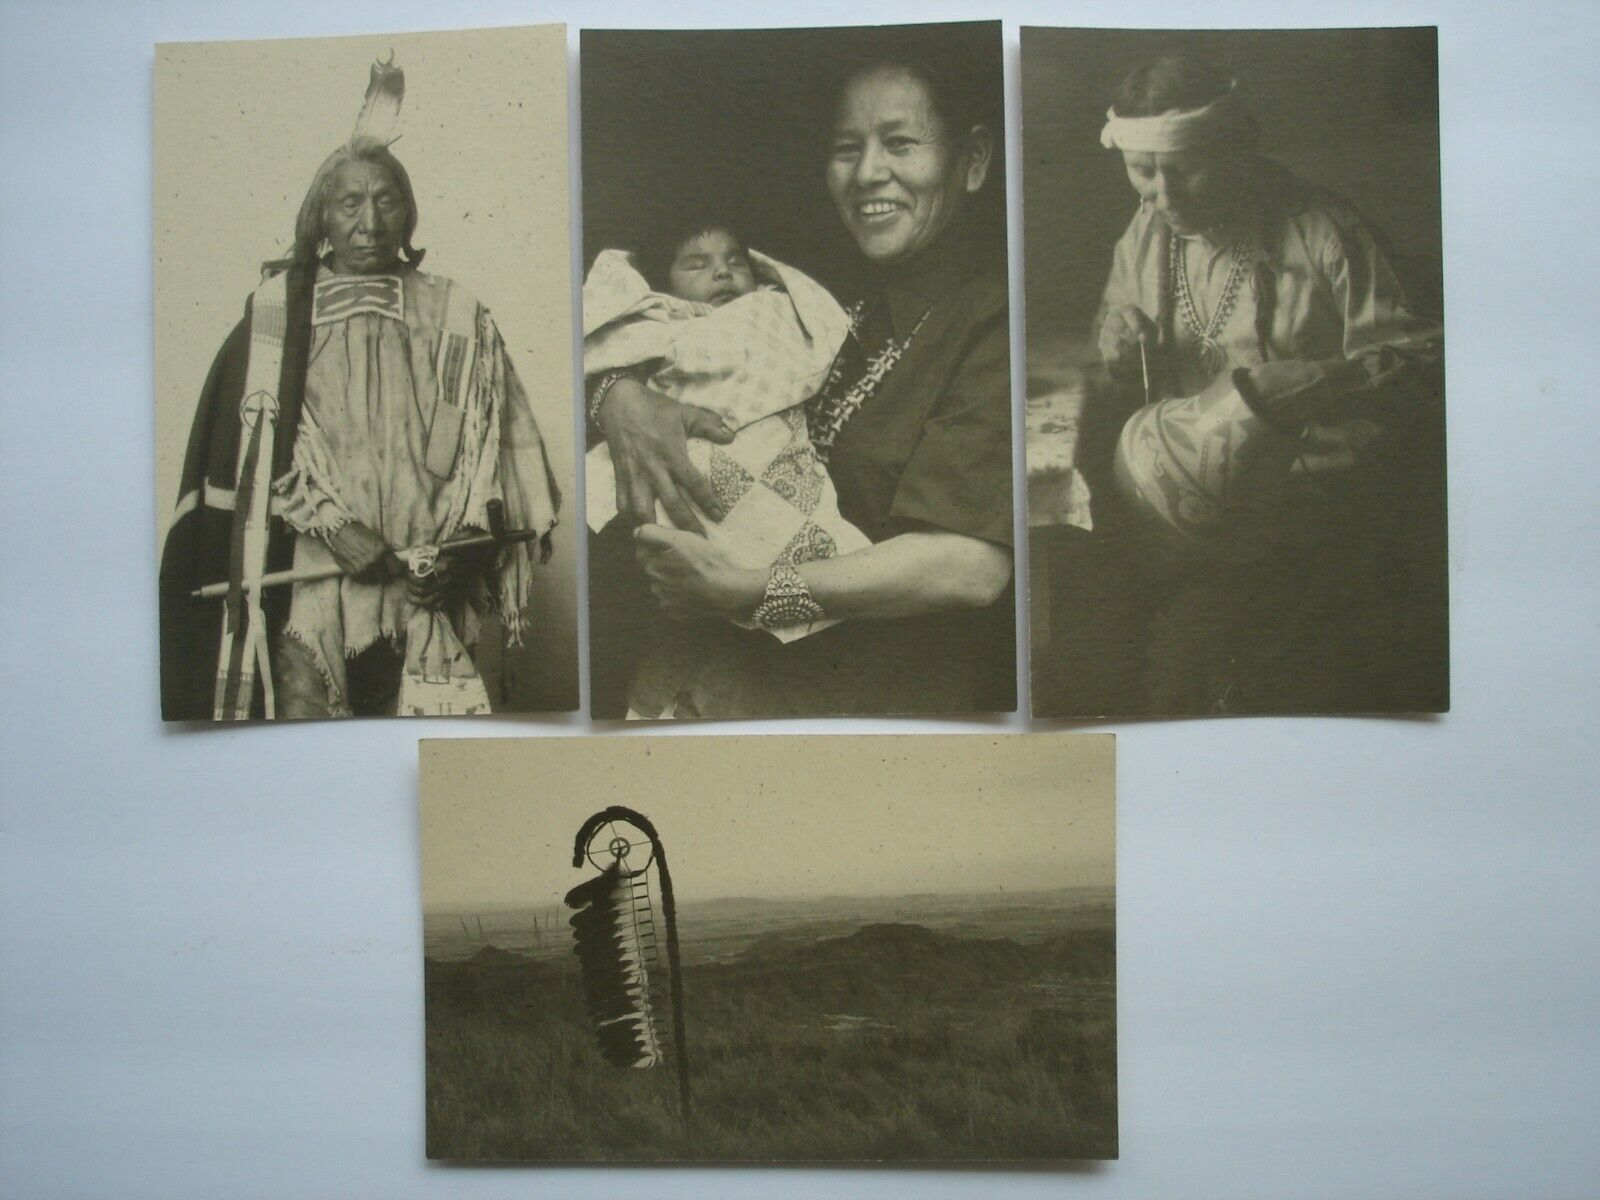 4 POSTCARDS OF NATIVE AMERICAN IMAGES